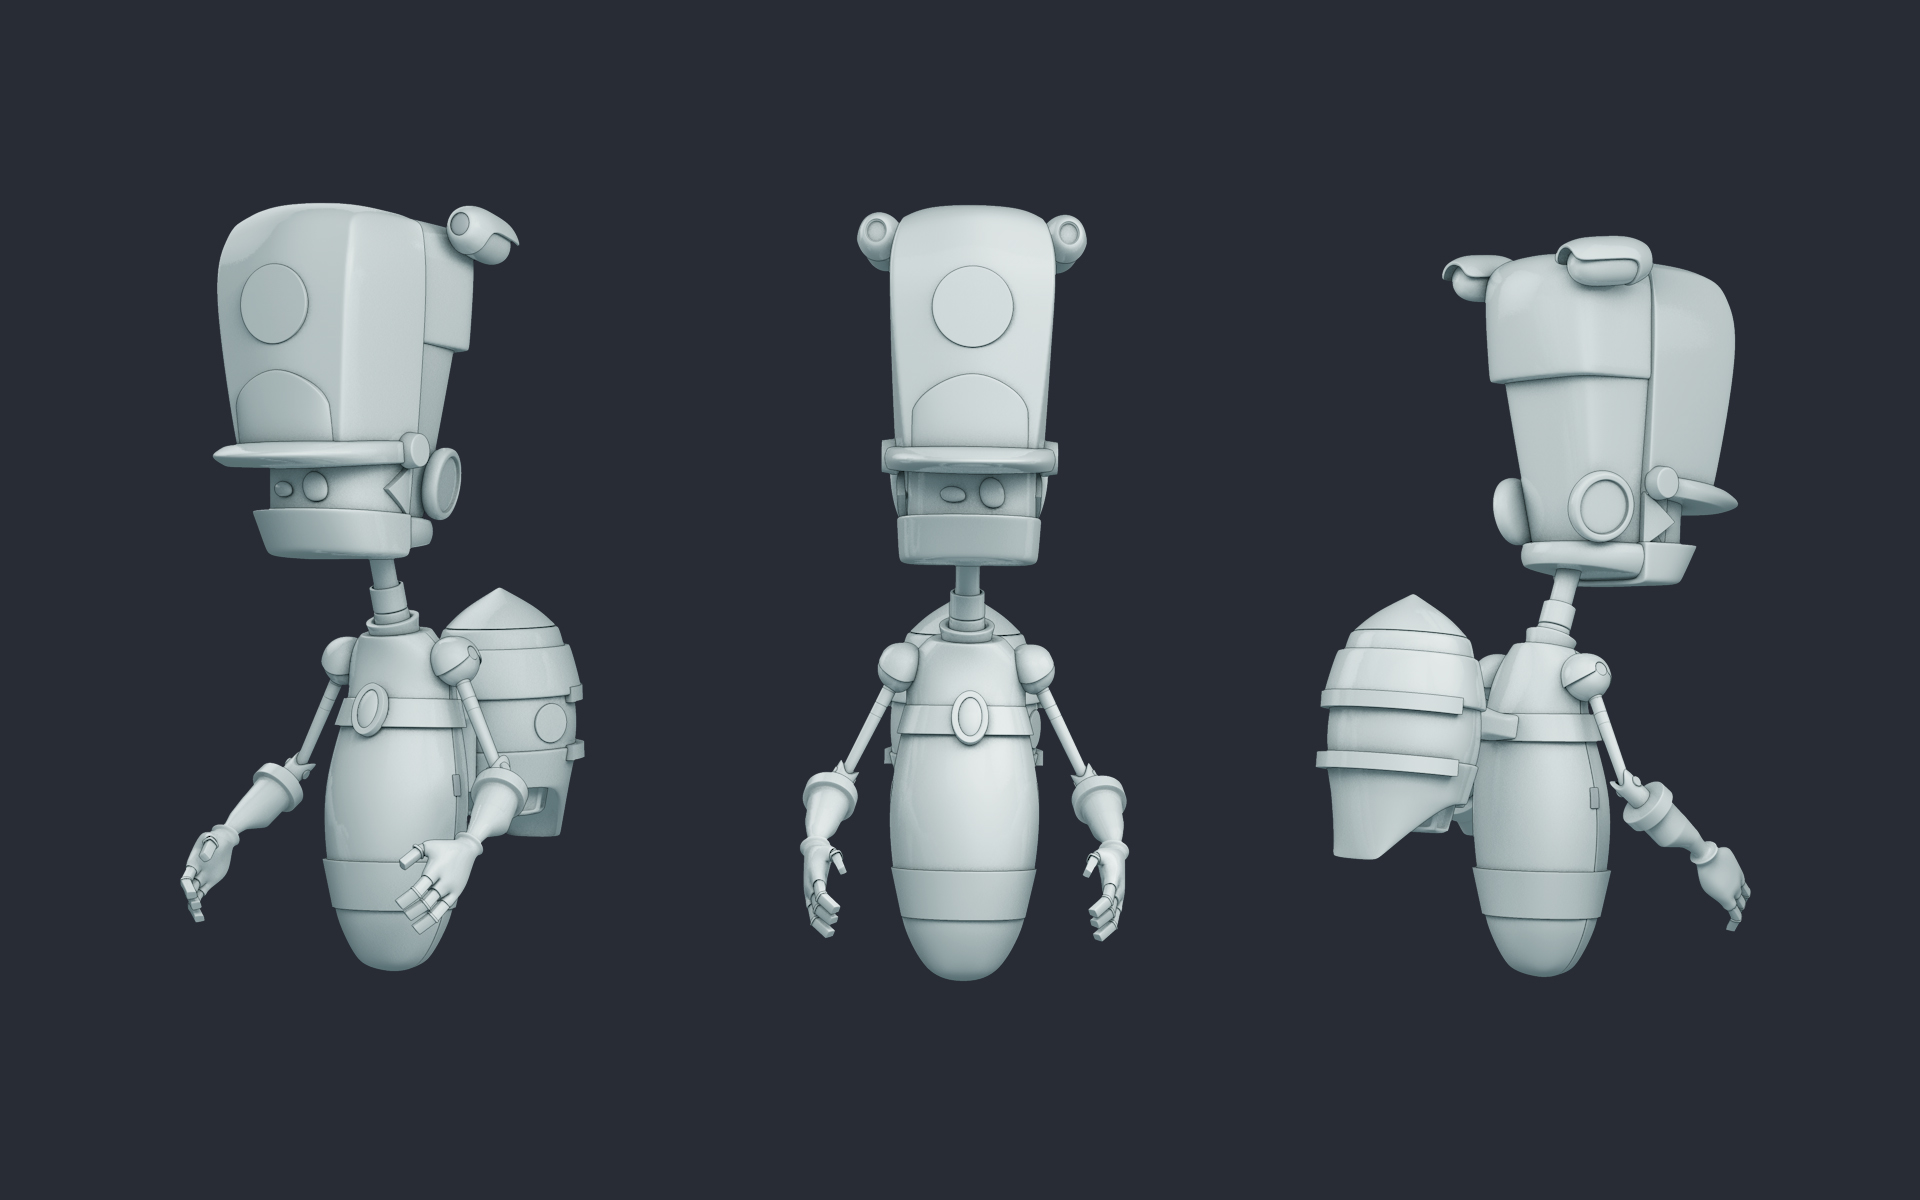 Personal Project: Robot 5 on Behance